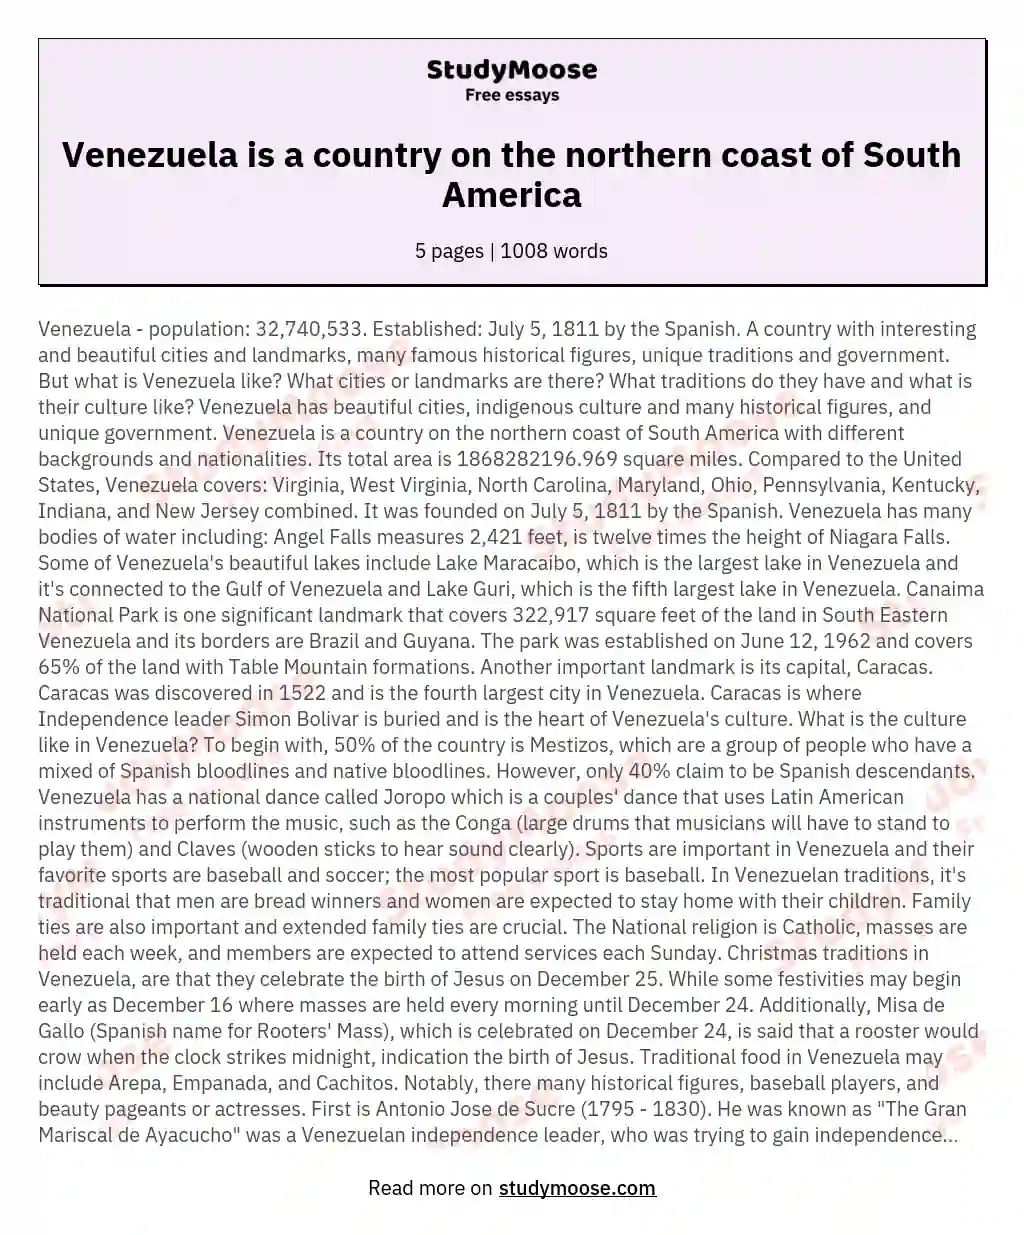 Venezuela is a country on the northern coast of South America